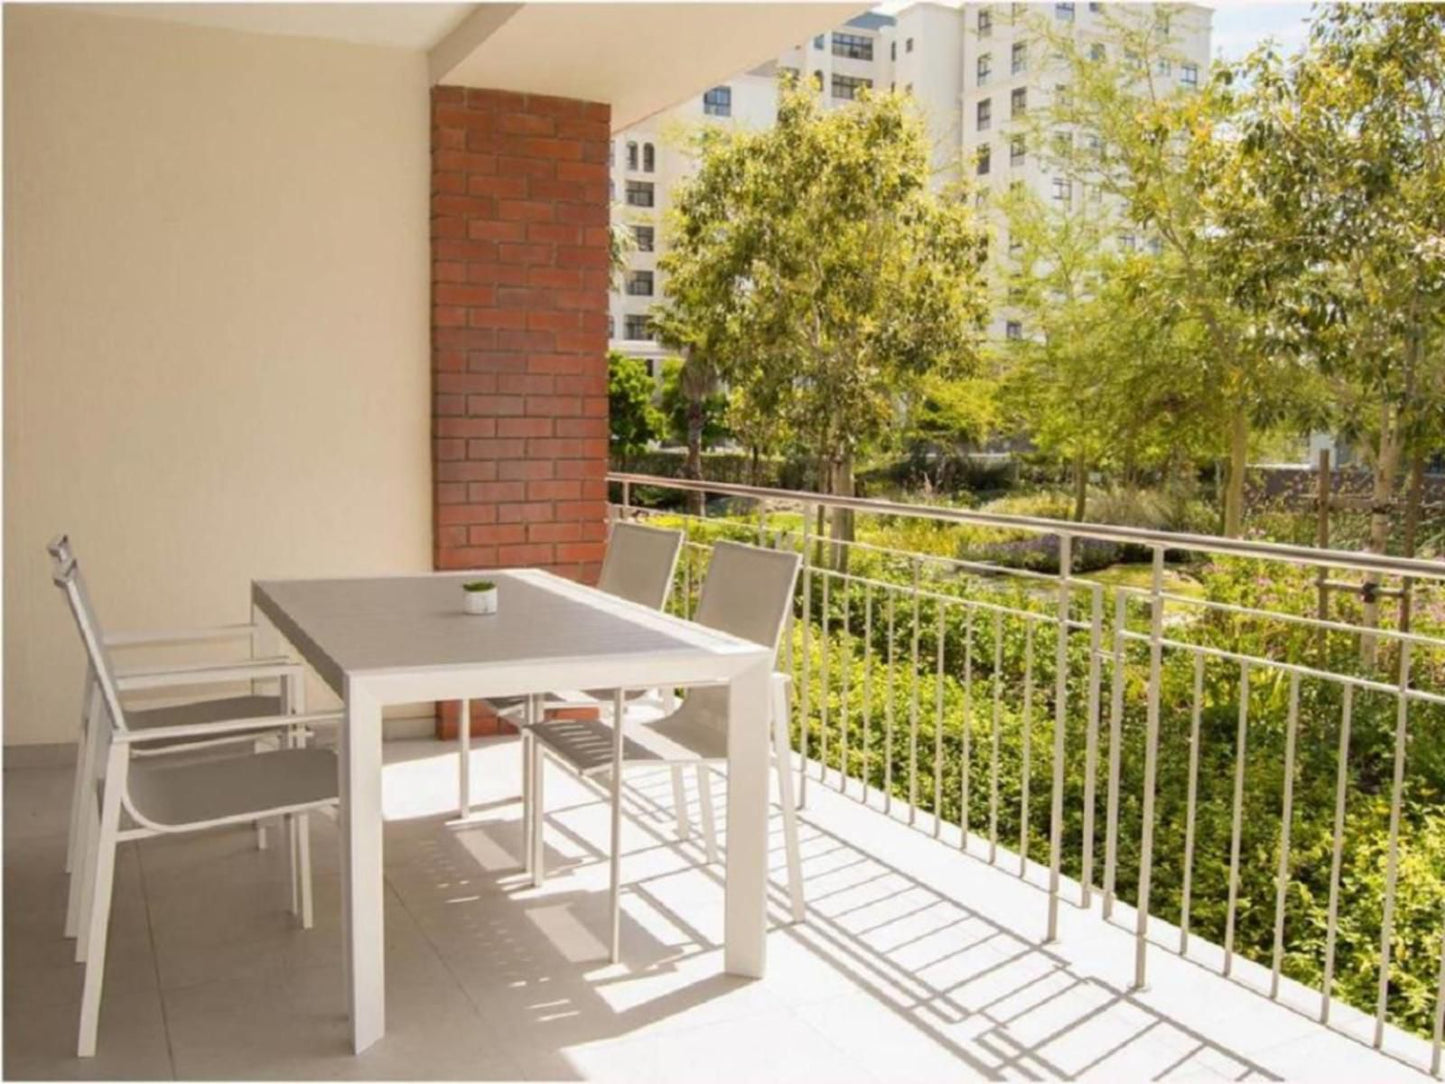 Luxury 2 Bedroom Apartment In Century City Century City Cape Town Western Cape South Africa Balcony, Architecture